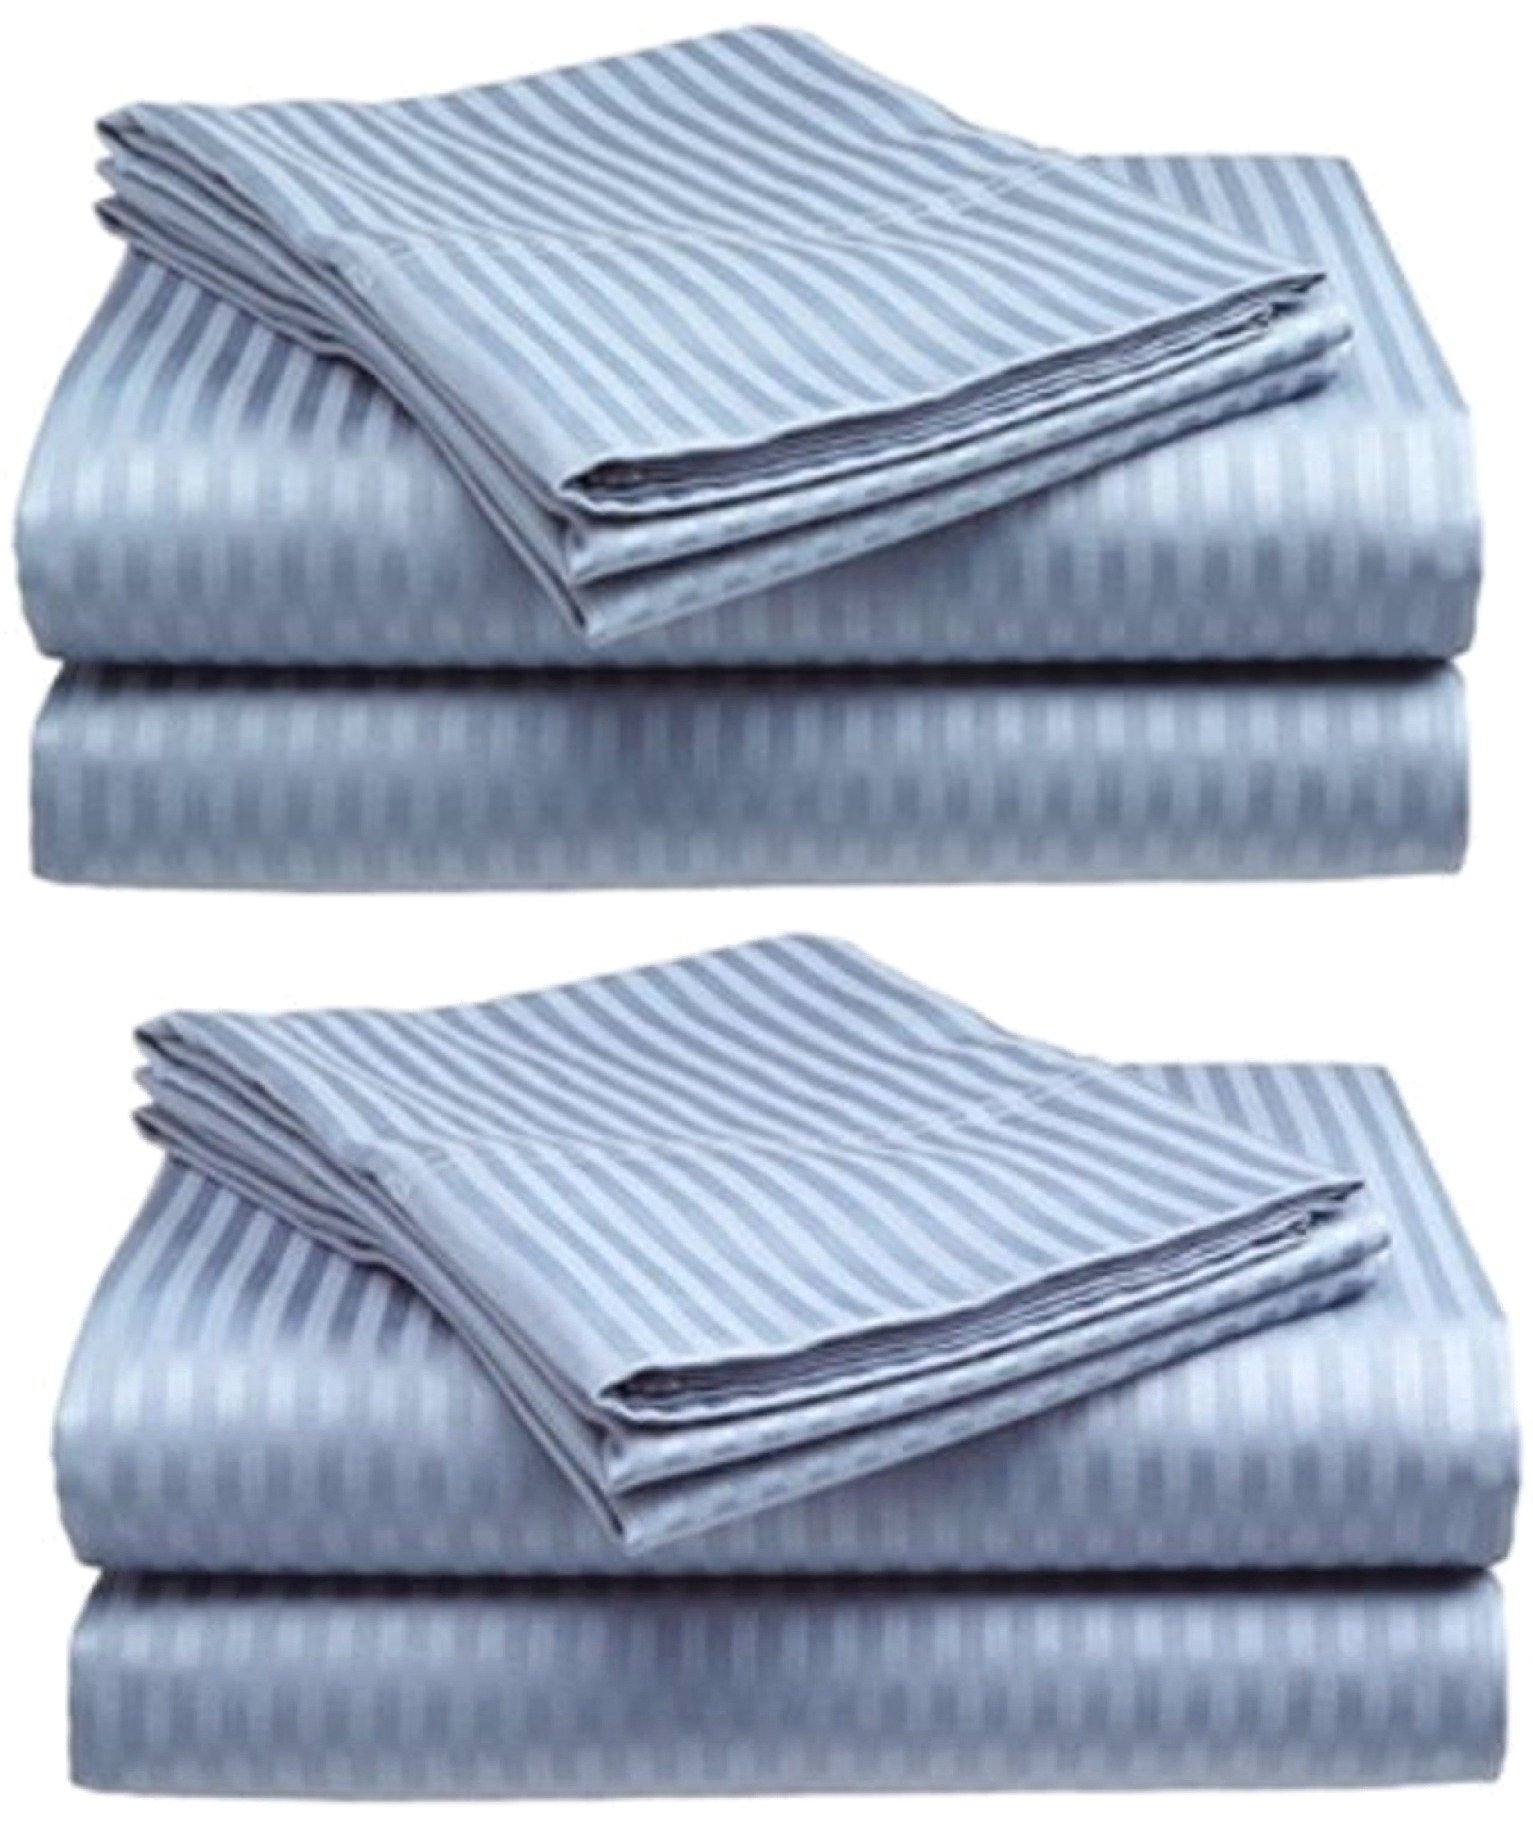 1200 Series 4 Piece Thin and Soft Bed Sheet Set Great for Summer King Set